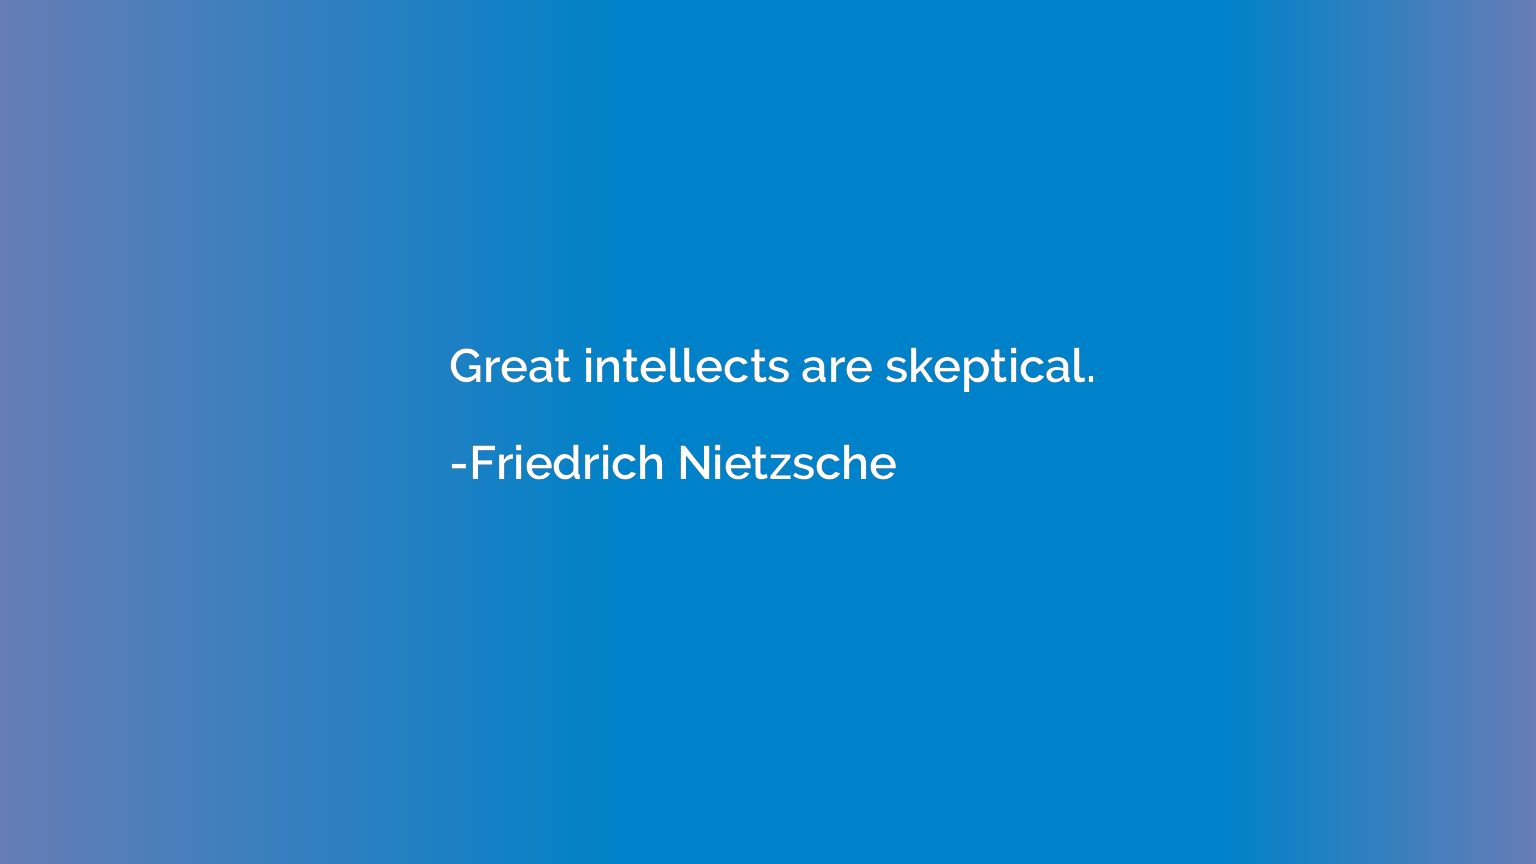 Great intellects are skeptical.